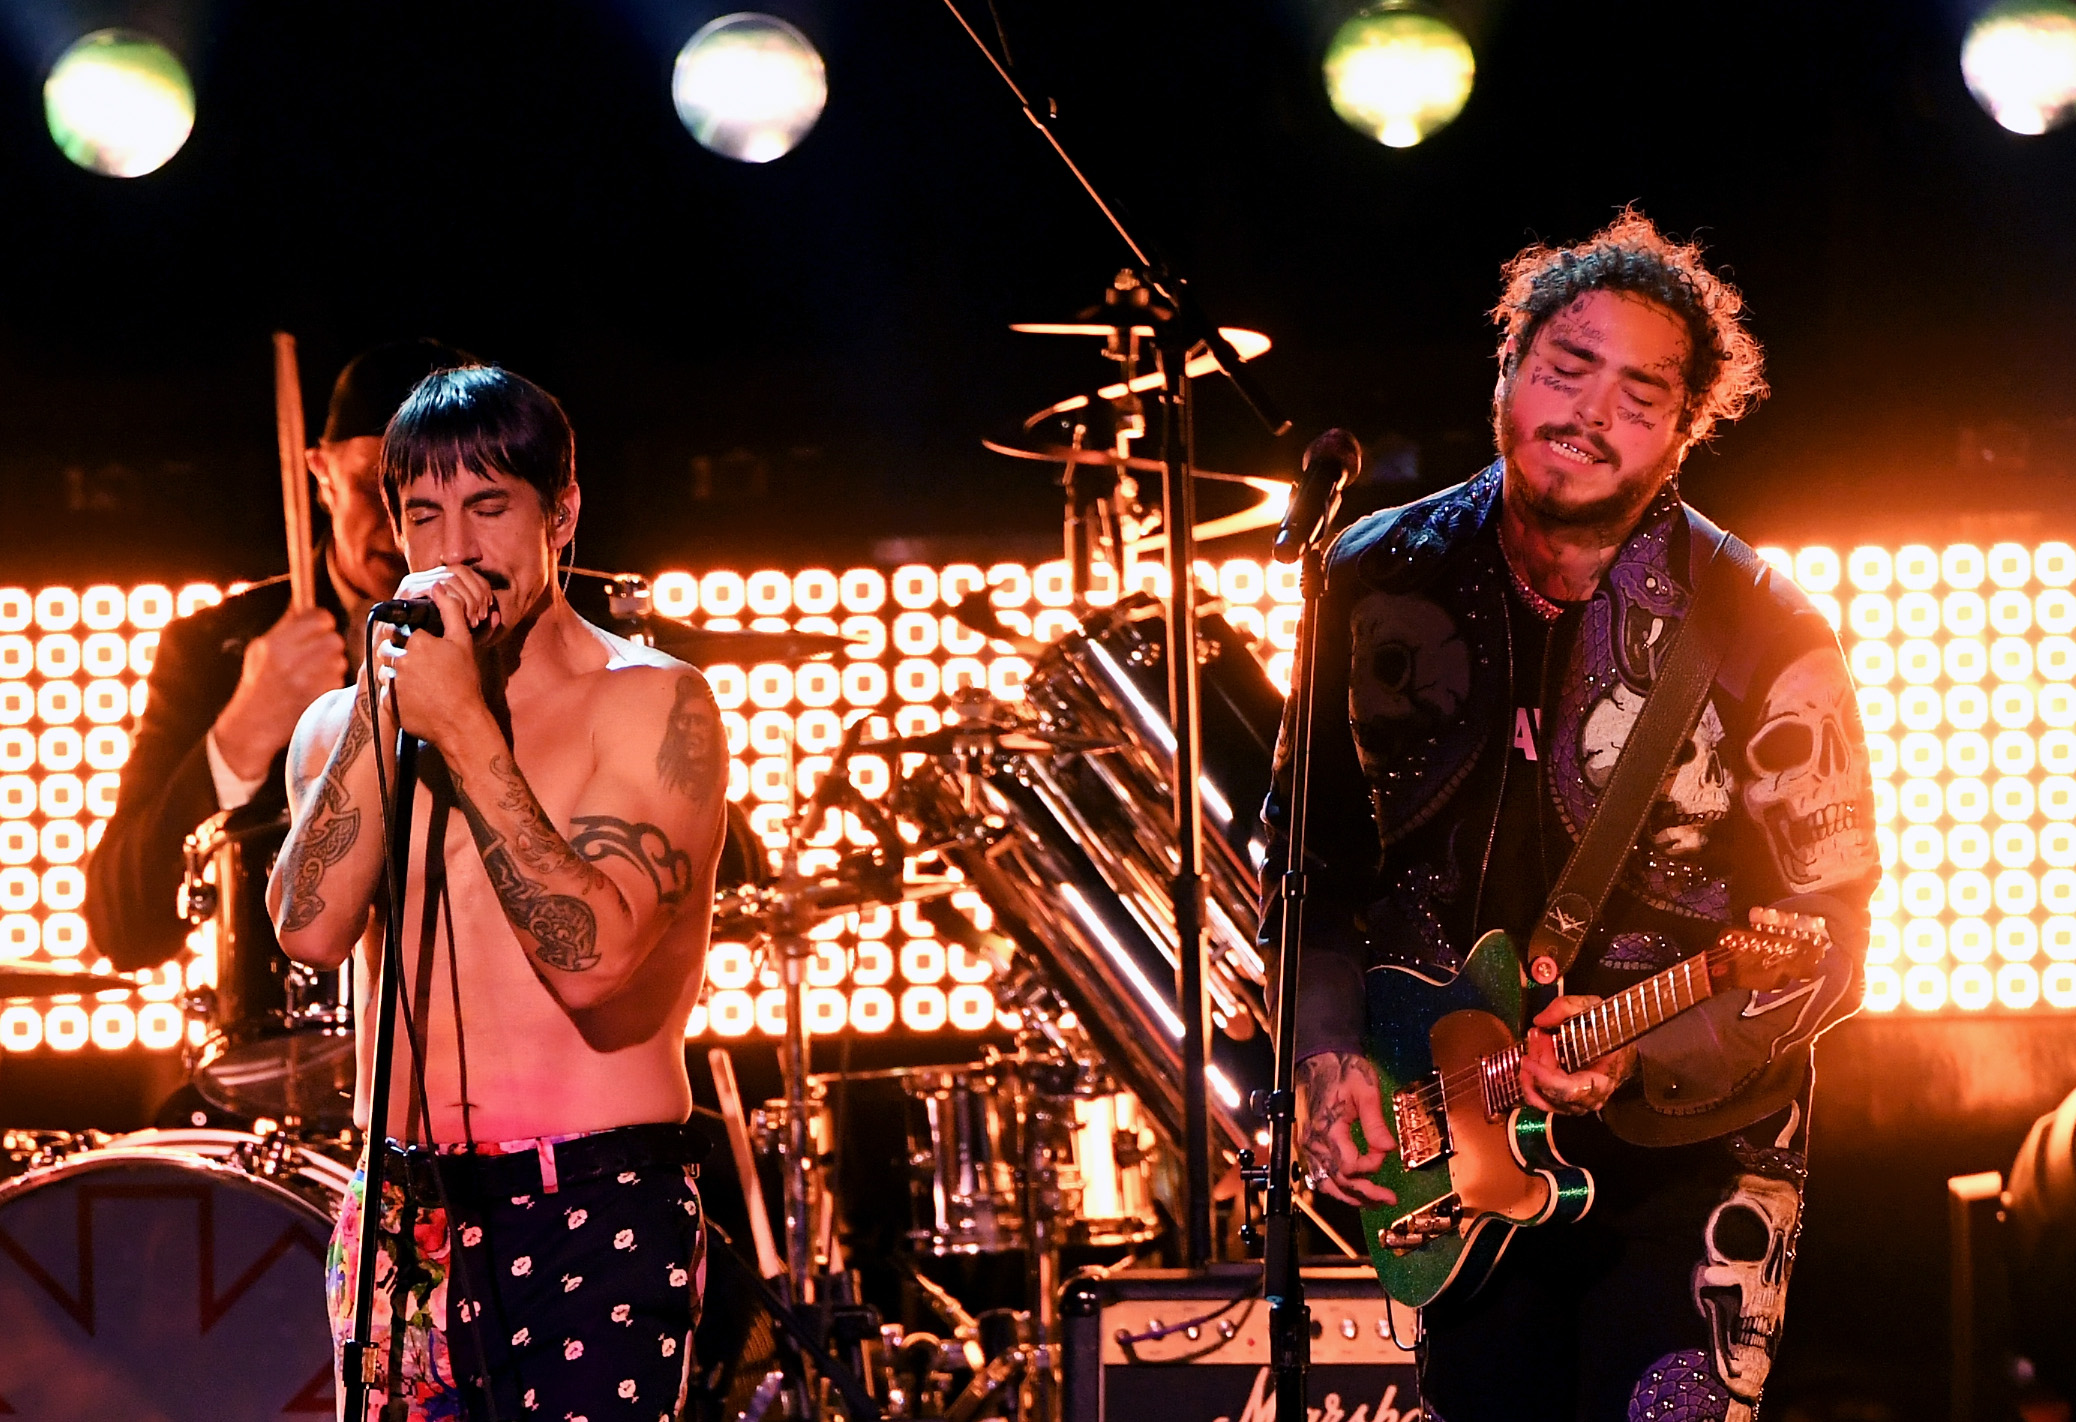 Post Malone Performing With RHCP Is A Thing Now & You’ll Have To Deal With It